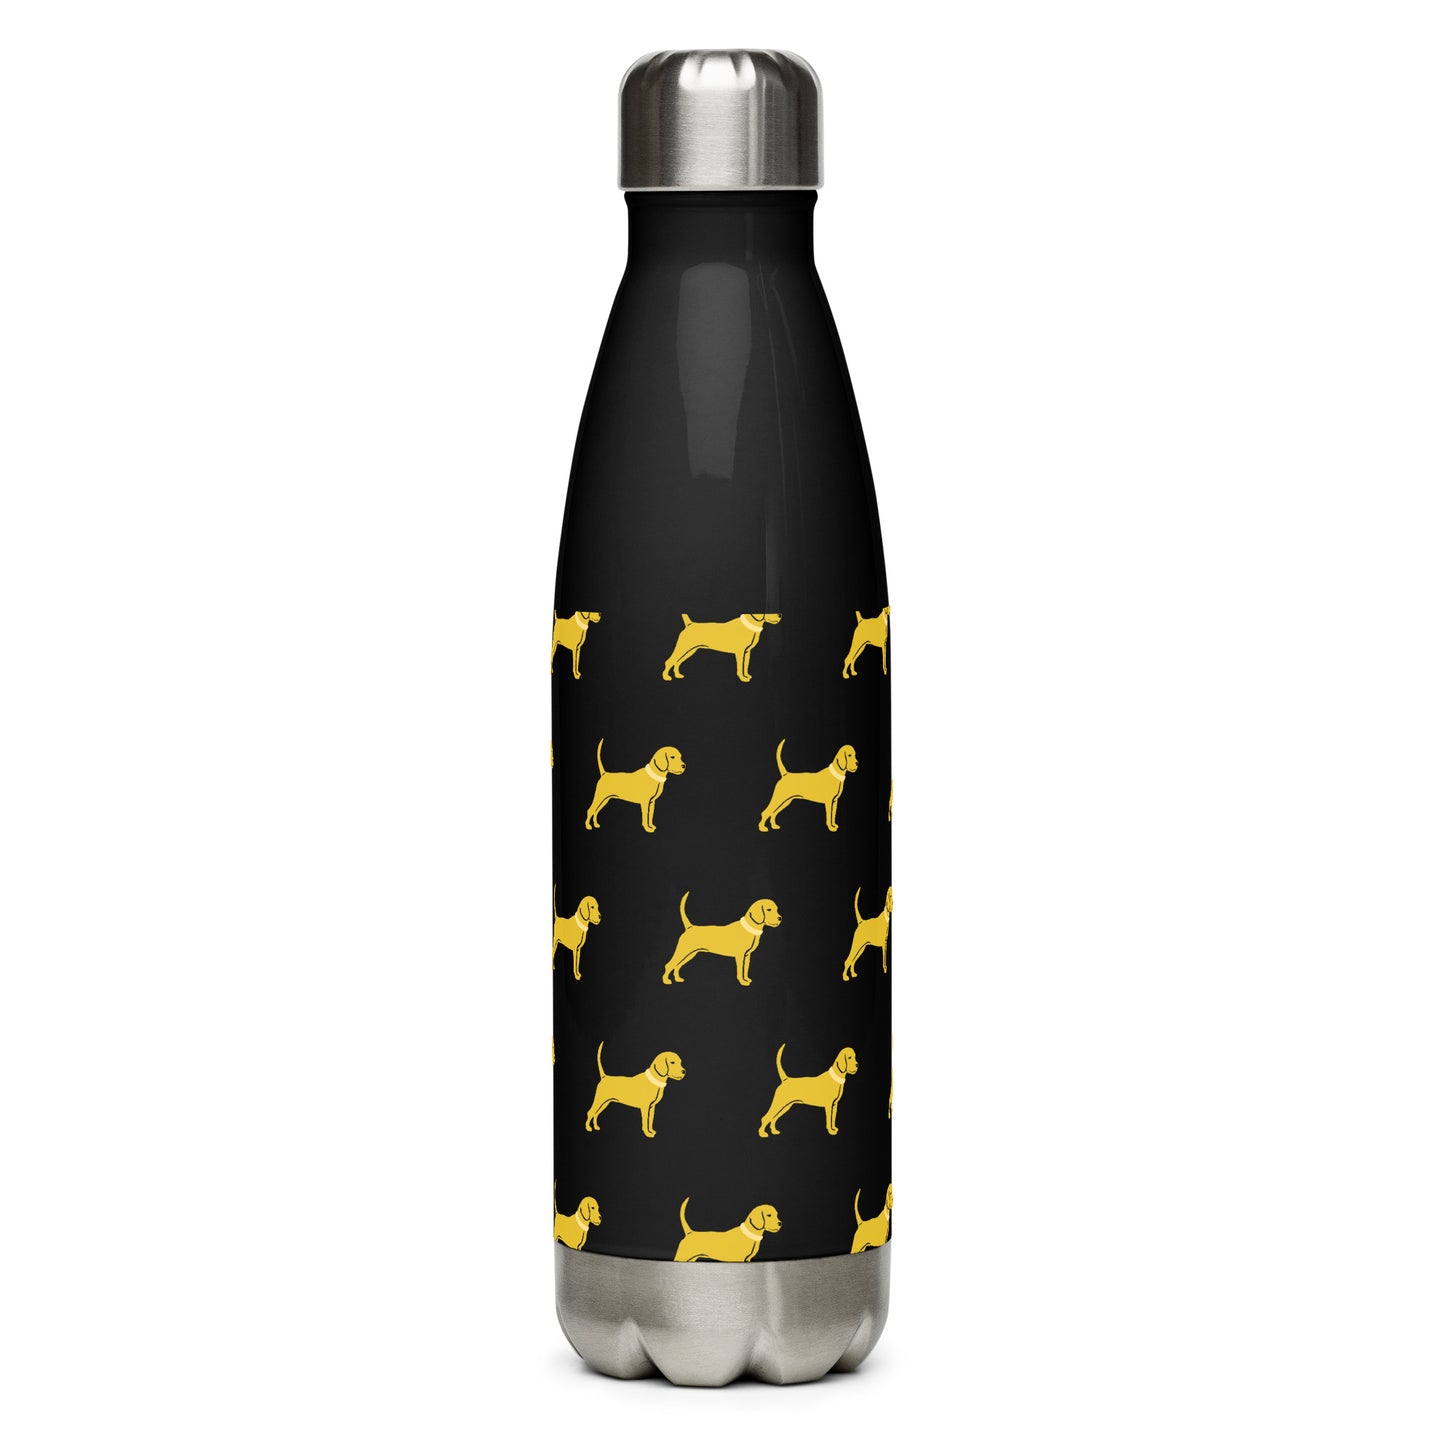 Stainless steel little yellow dog water bottle